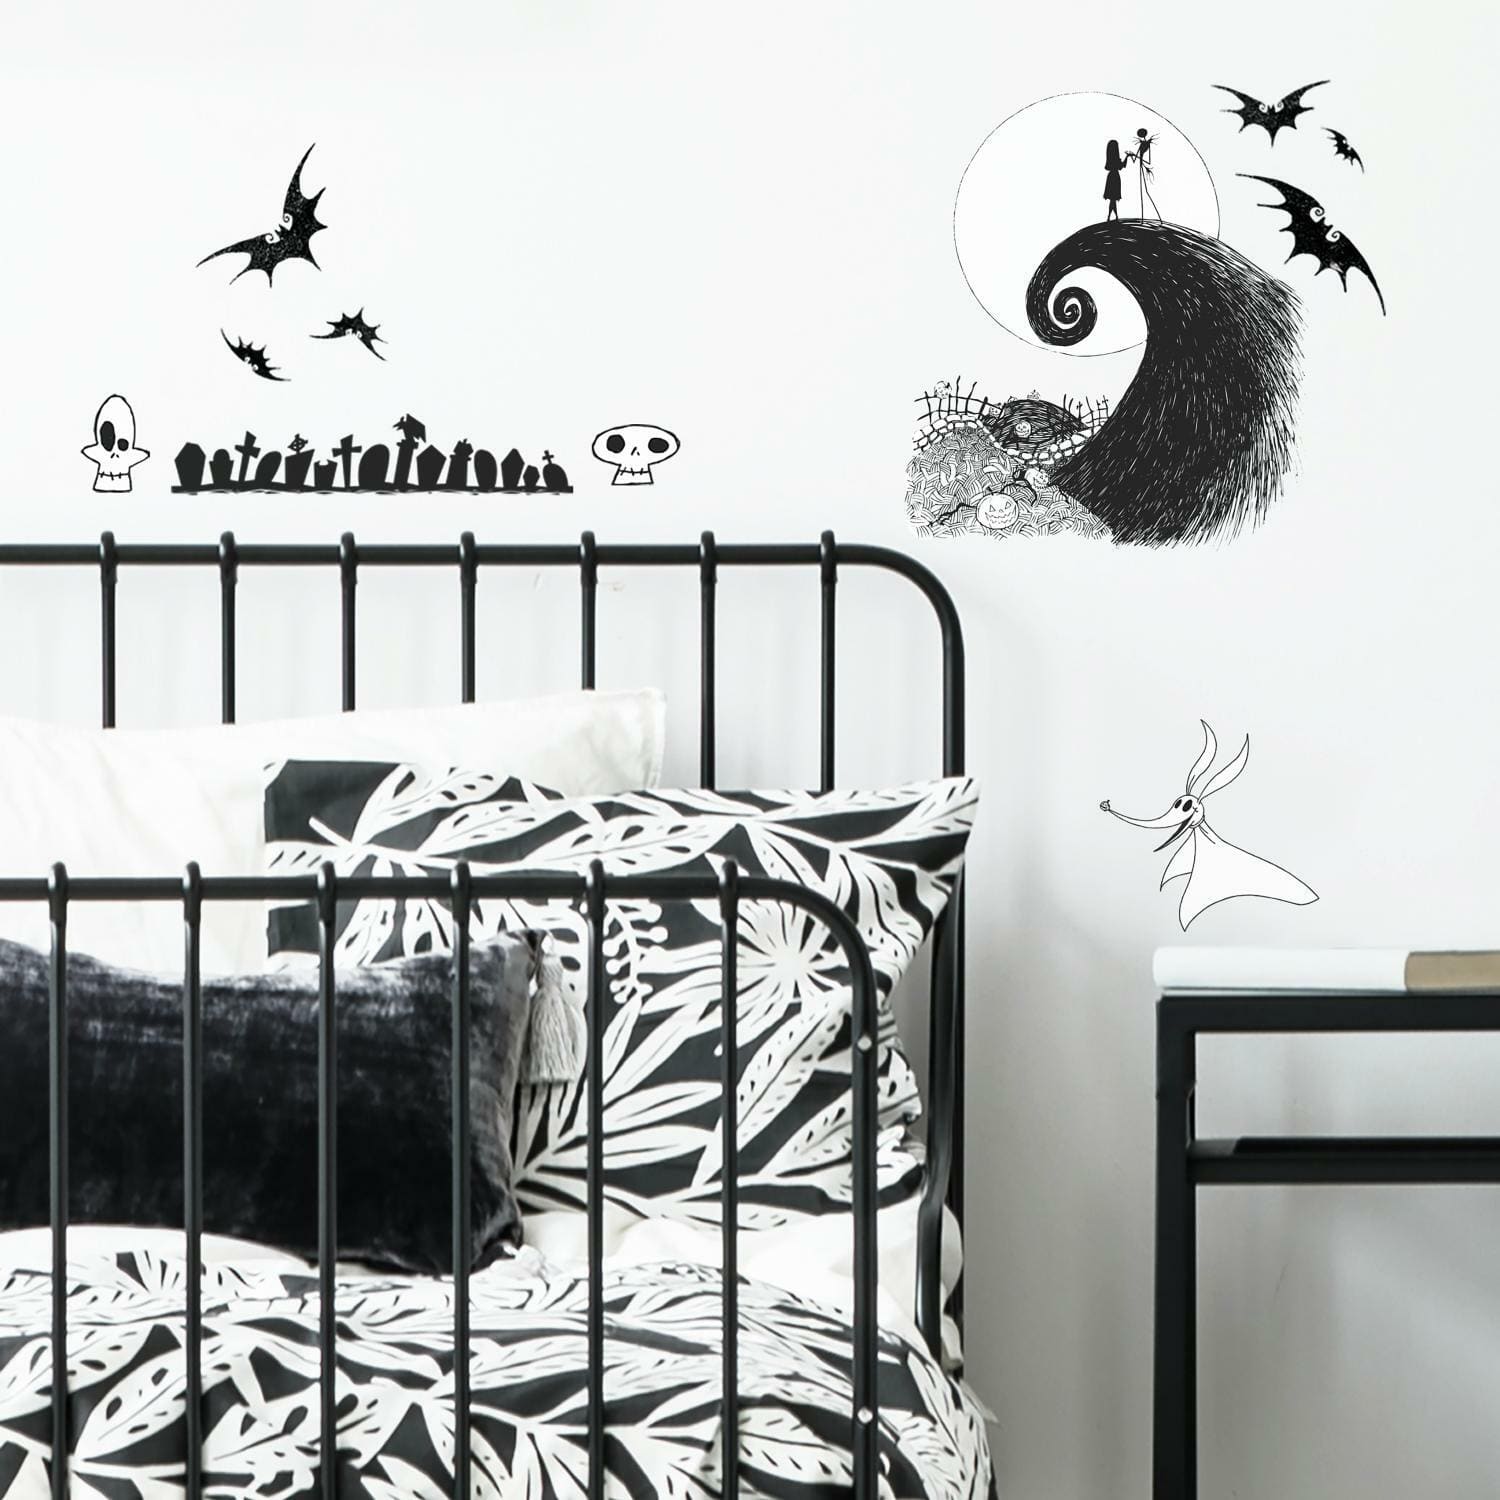 Children's RoomMates Nightmare Before Christmas Wall Stickers/ Wall Decals 